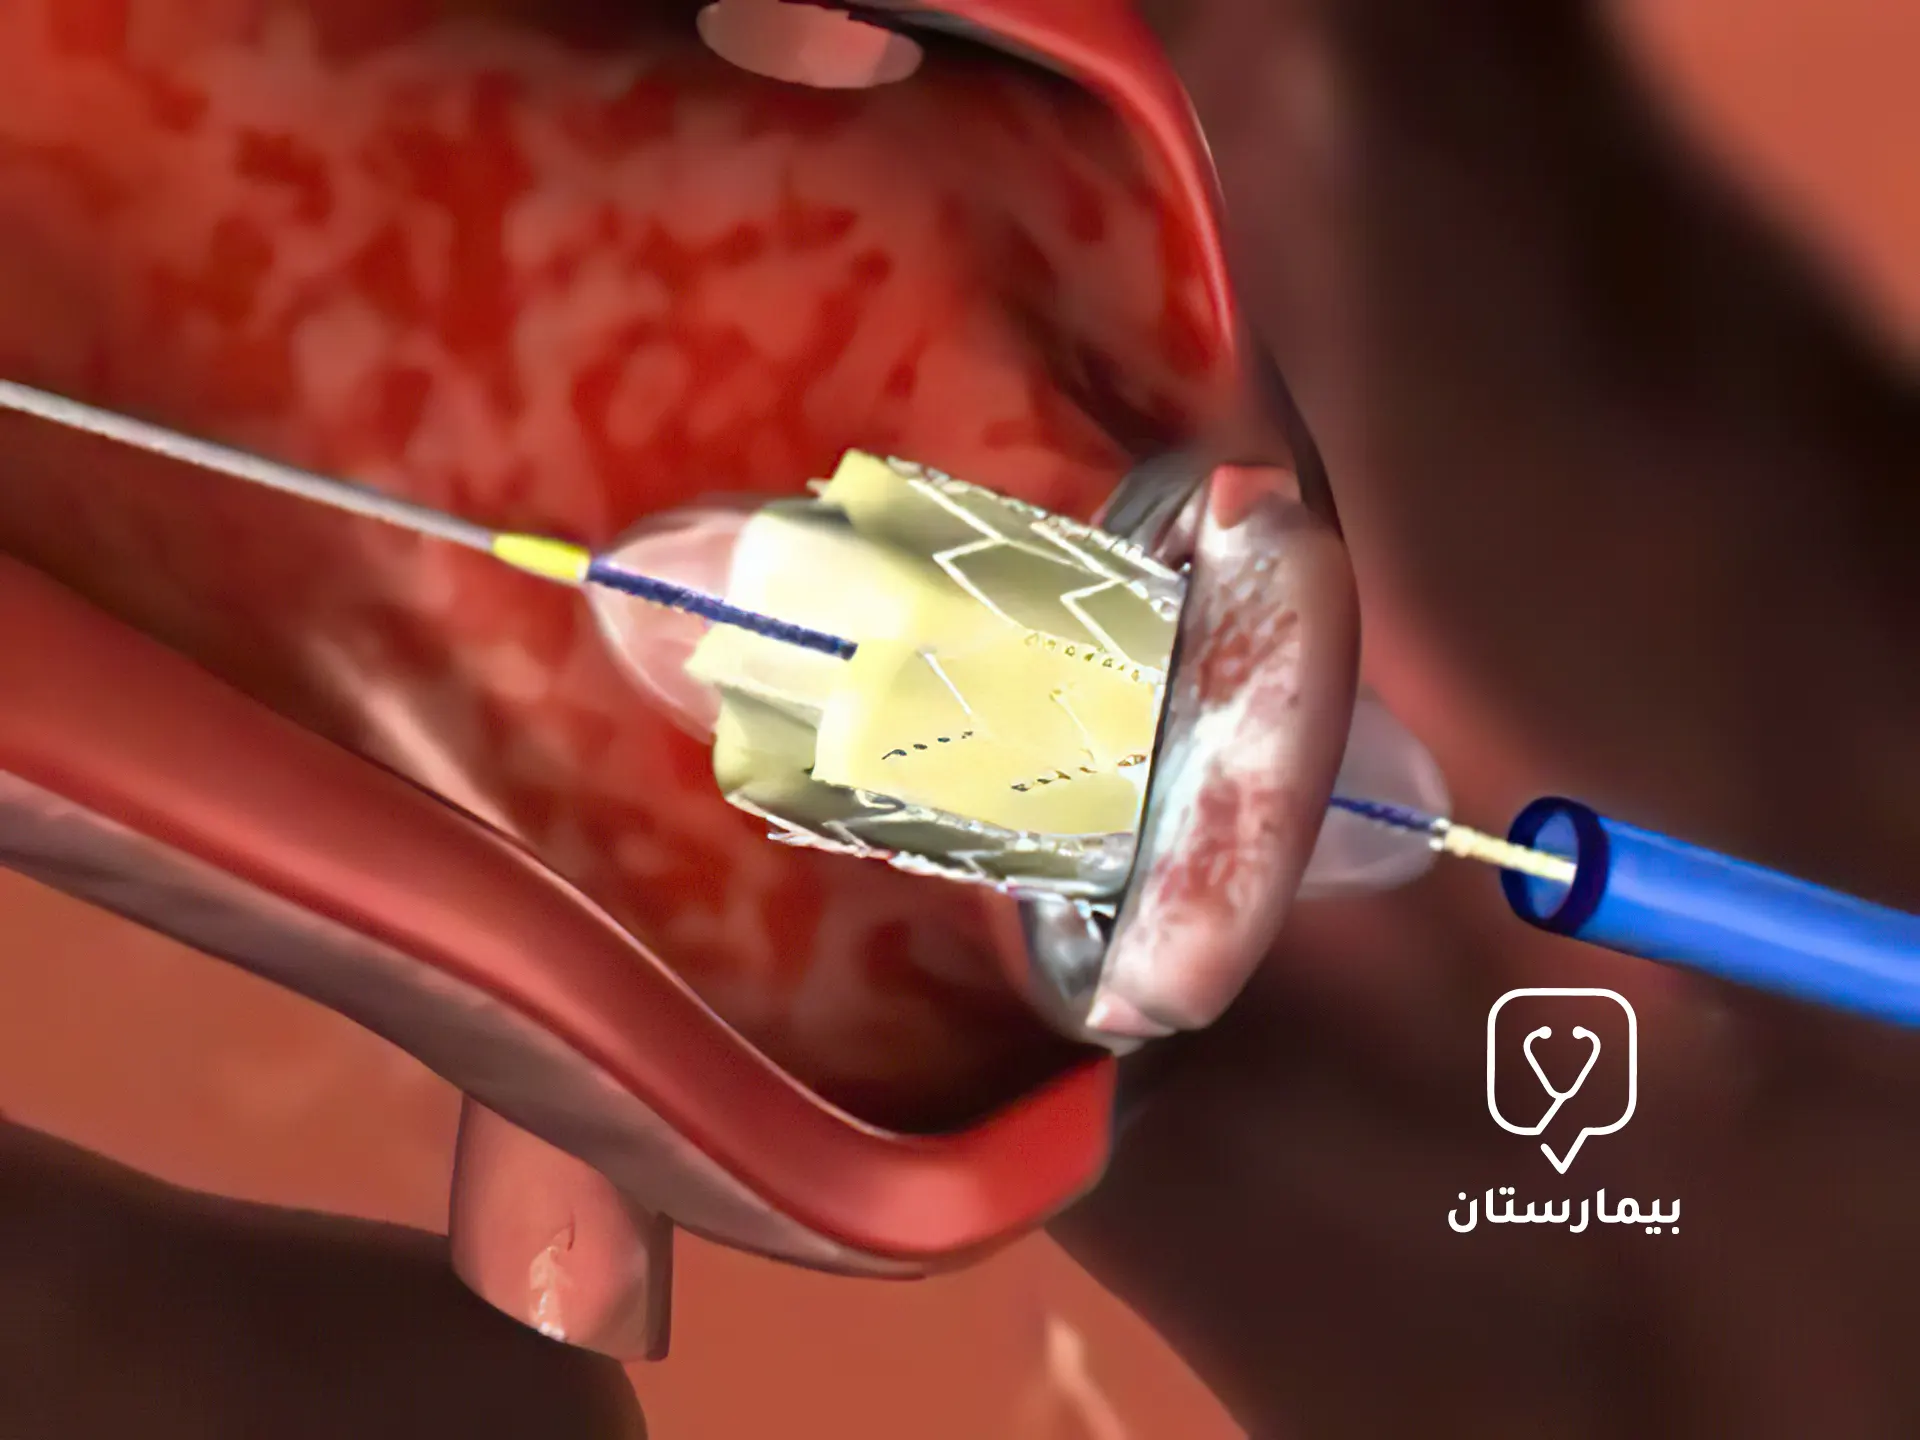 A catheter with an inflatable balloon on the end is inserted into the aortic valve